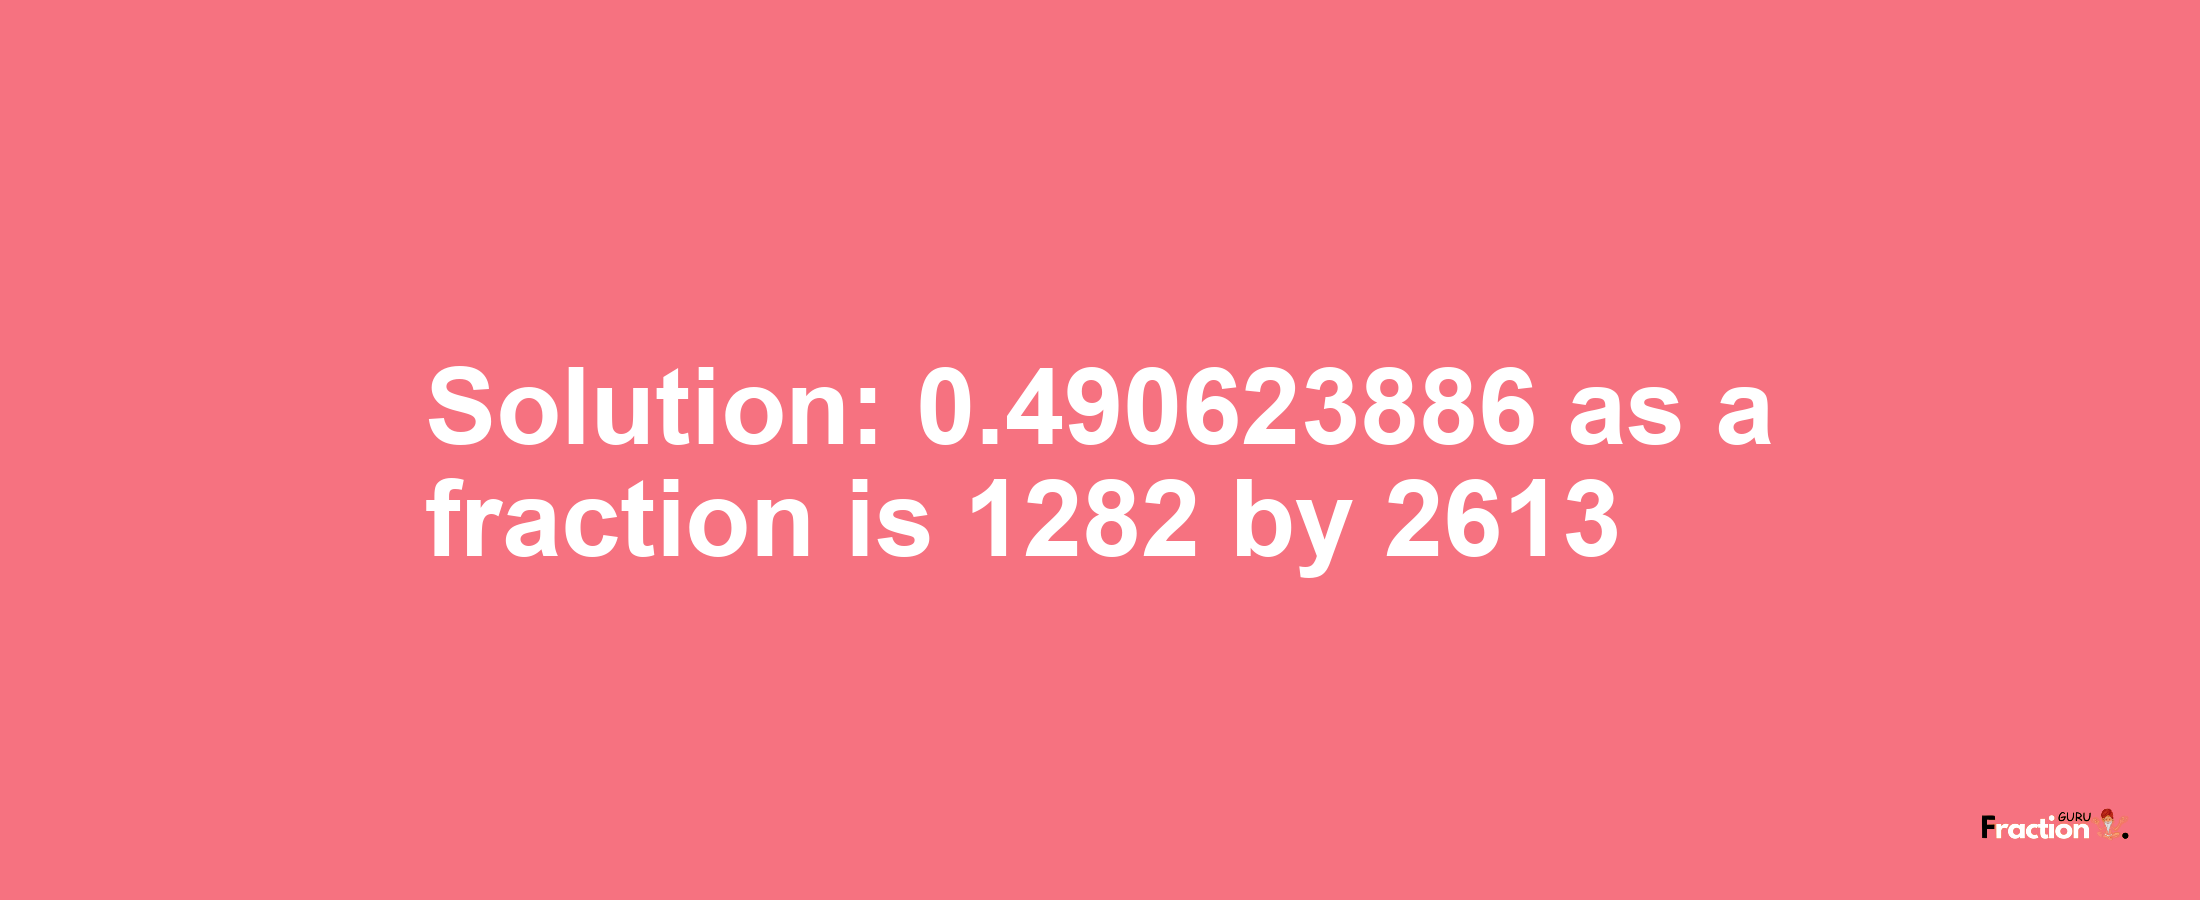 Solution:0.490623886 as a fraction is 1282/2613